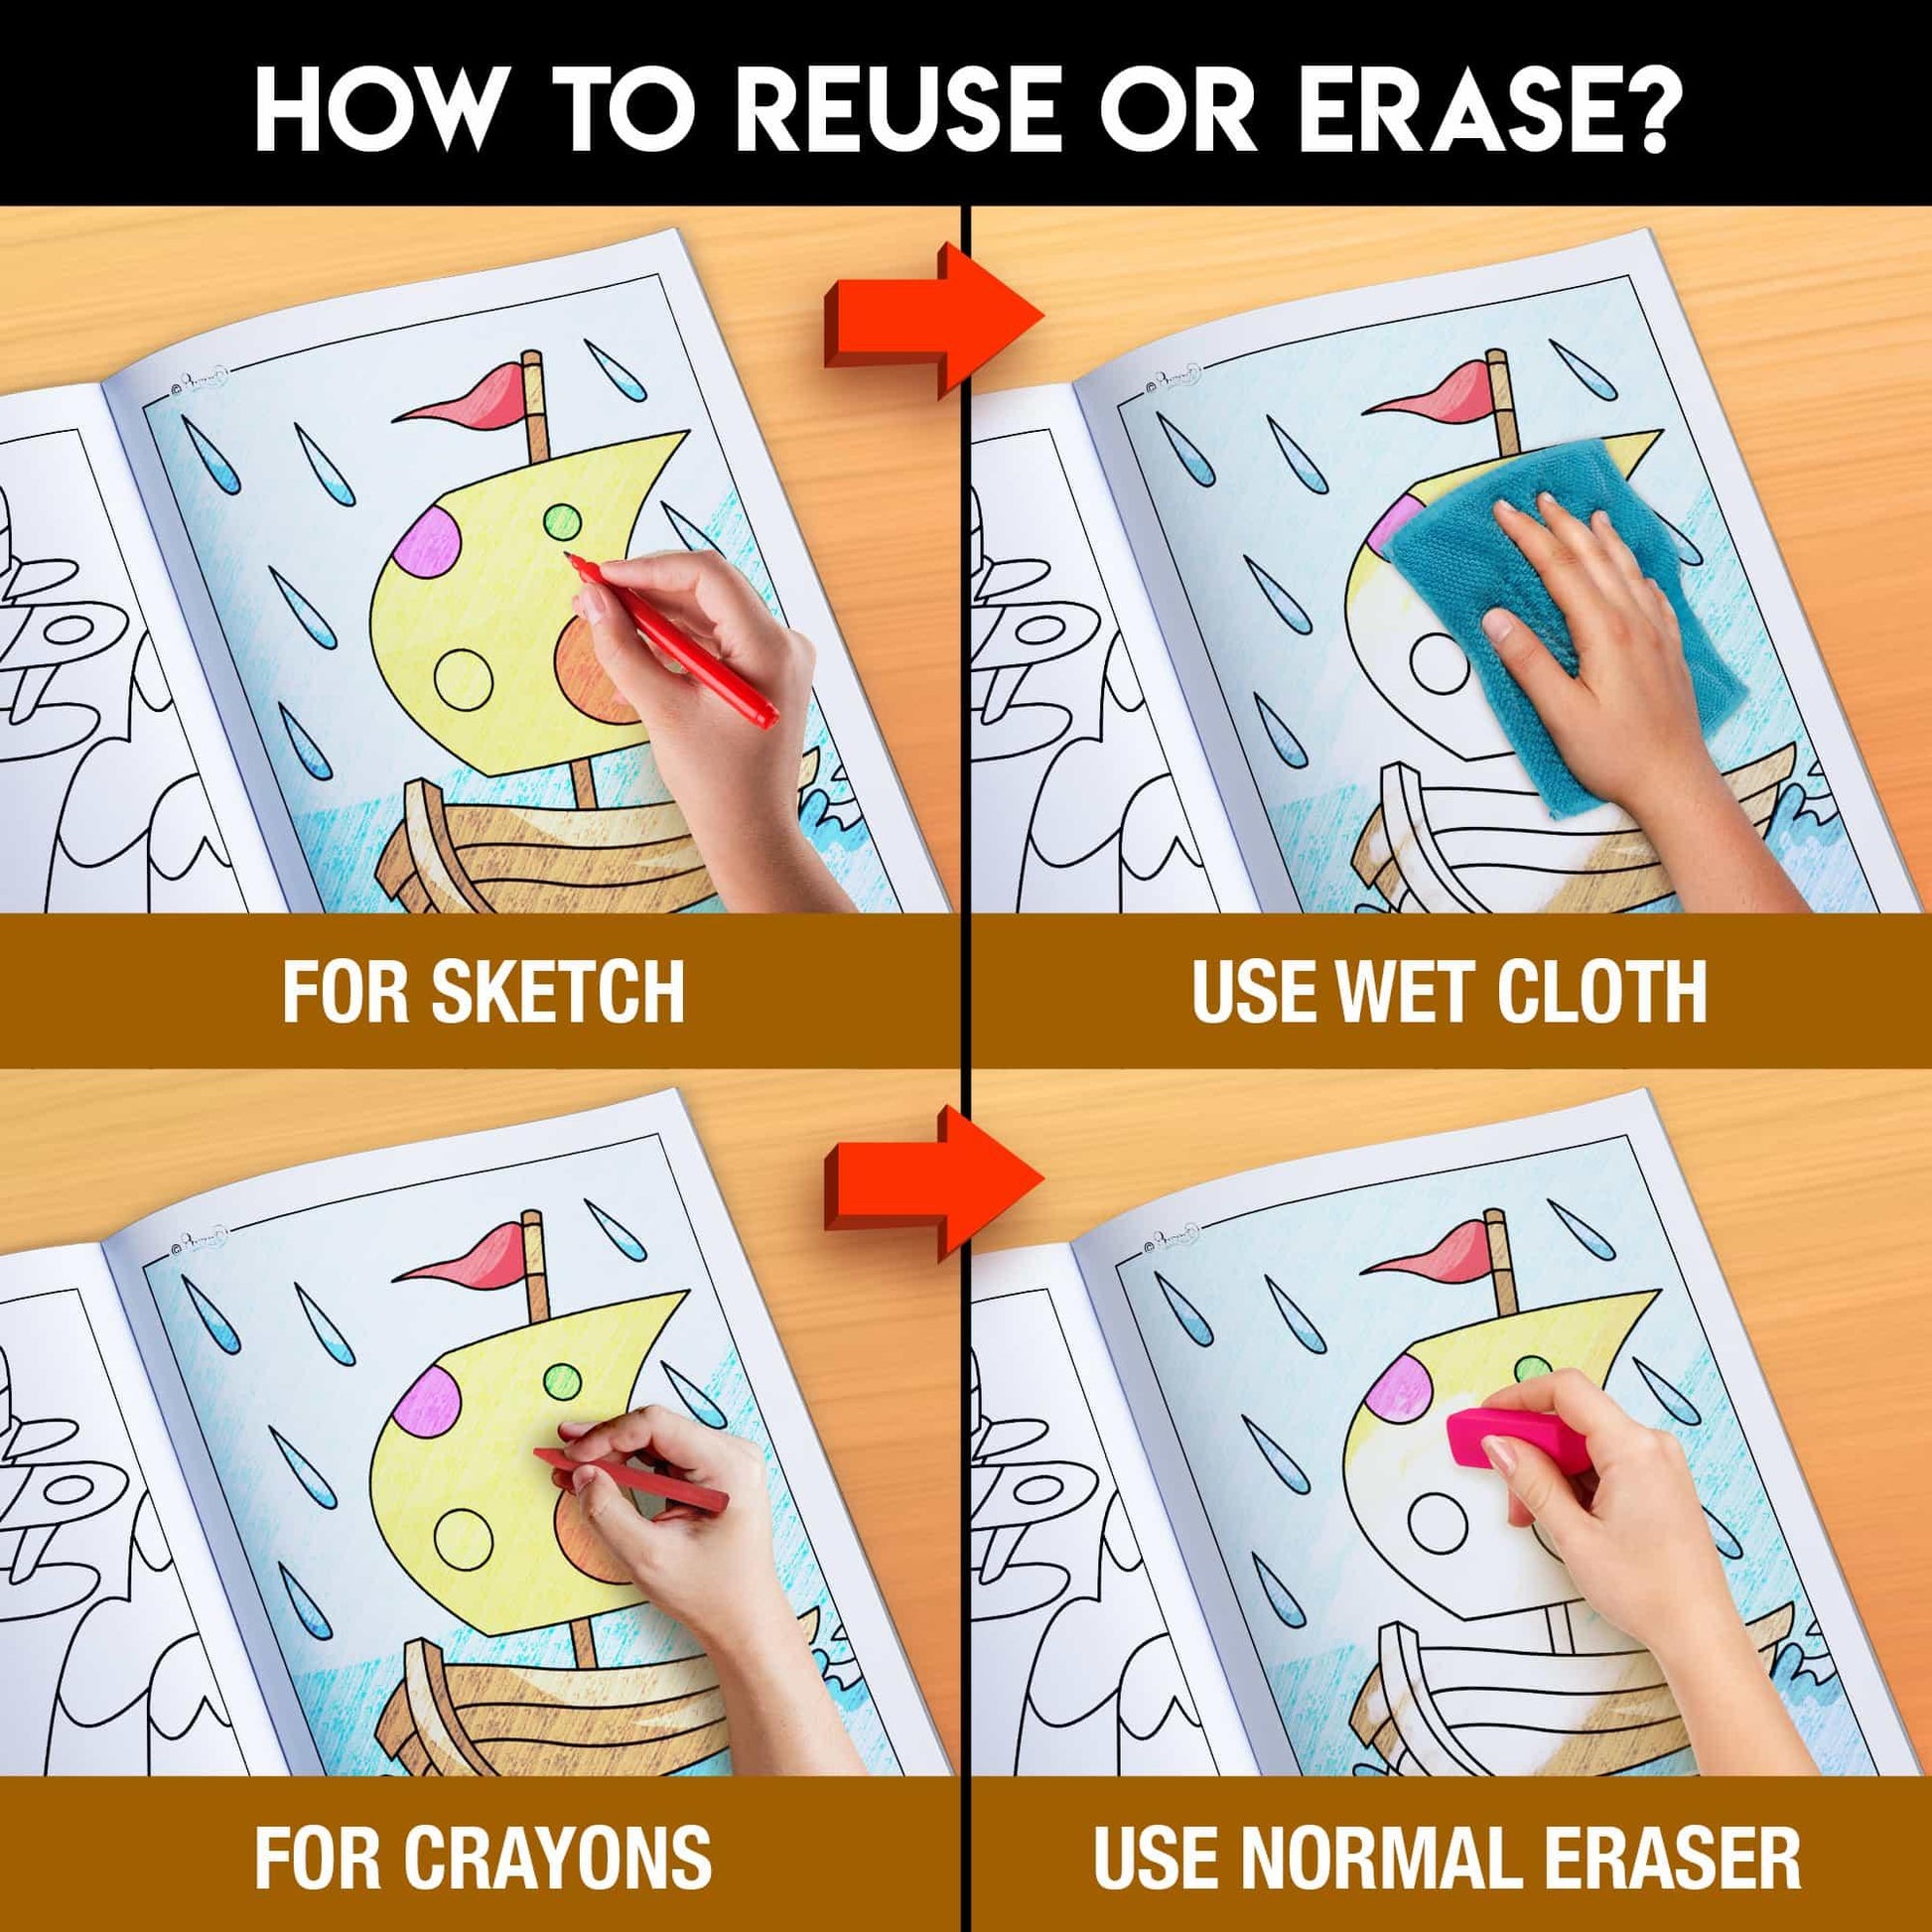 The image has a brown background with four pictures demonstrating how to reuse or erase: the first picture depicts sketching on the sheet, the second shows using a wet cloth to remove sketches, the third image displays crayons colouring on the sheet, and the fourth image illustrates erasing crayons with a regular eraser.